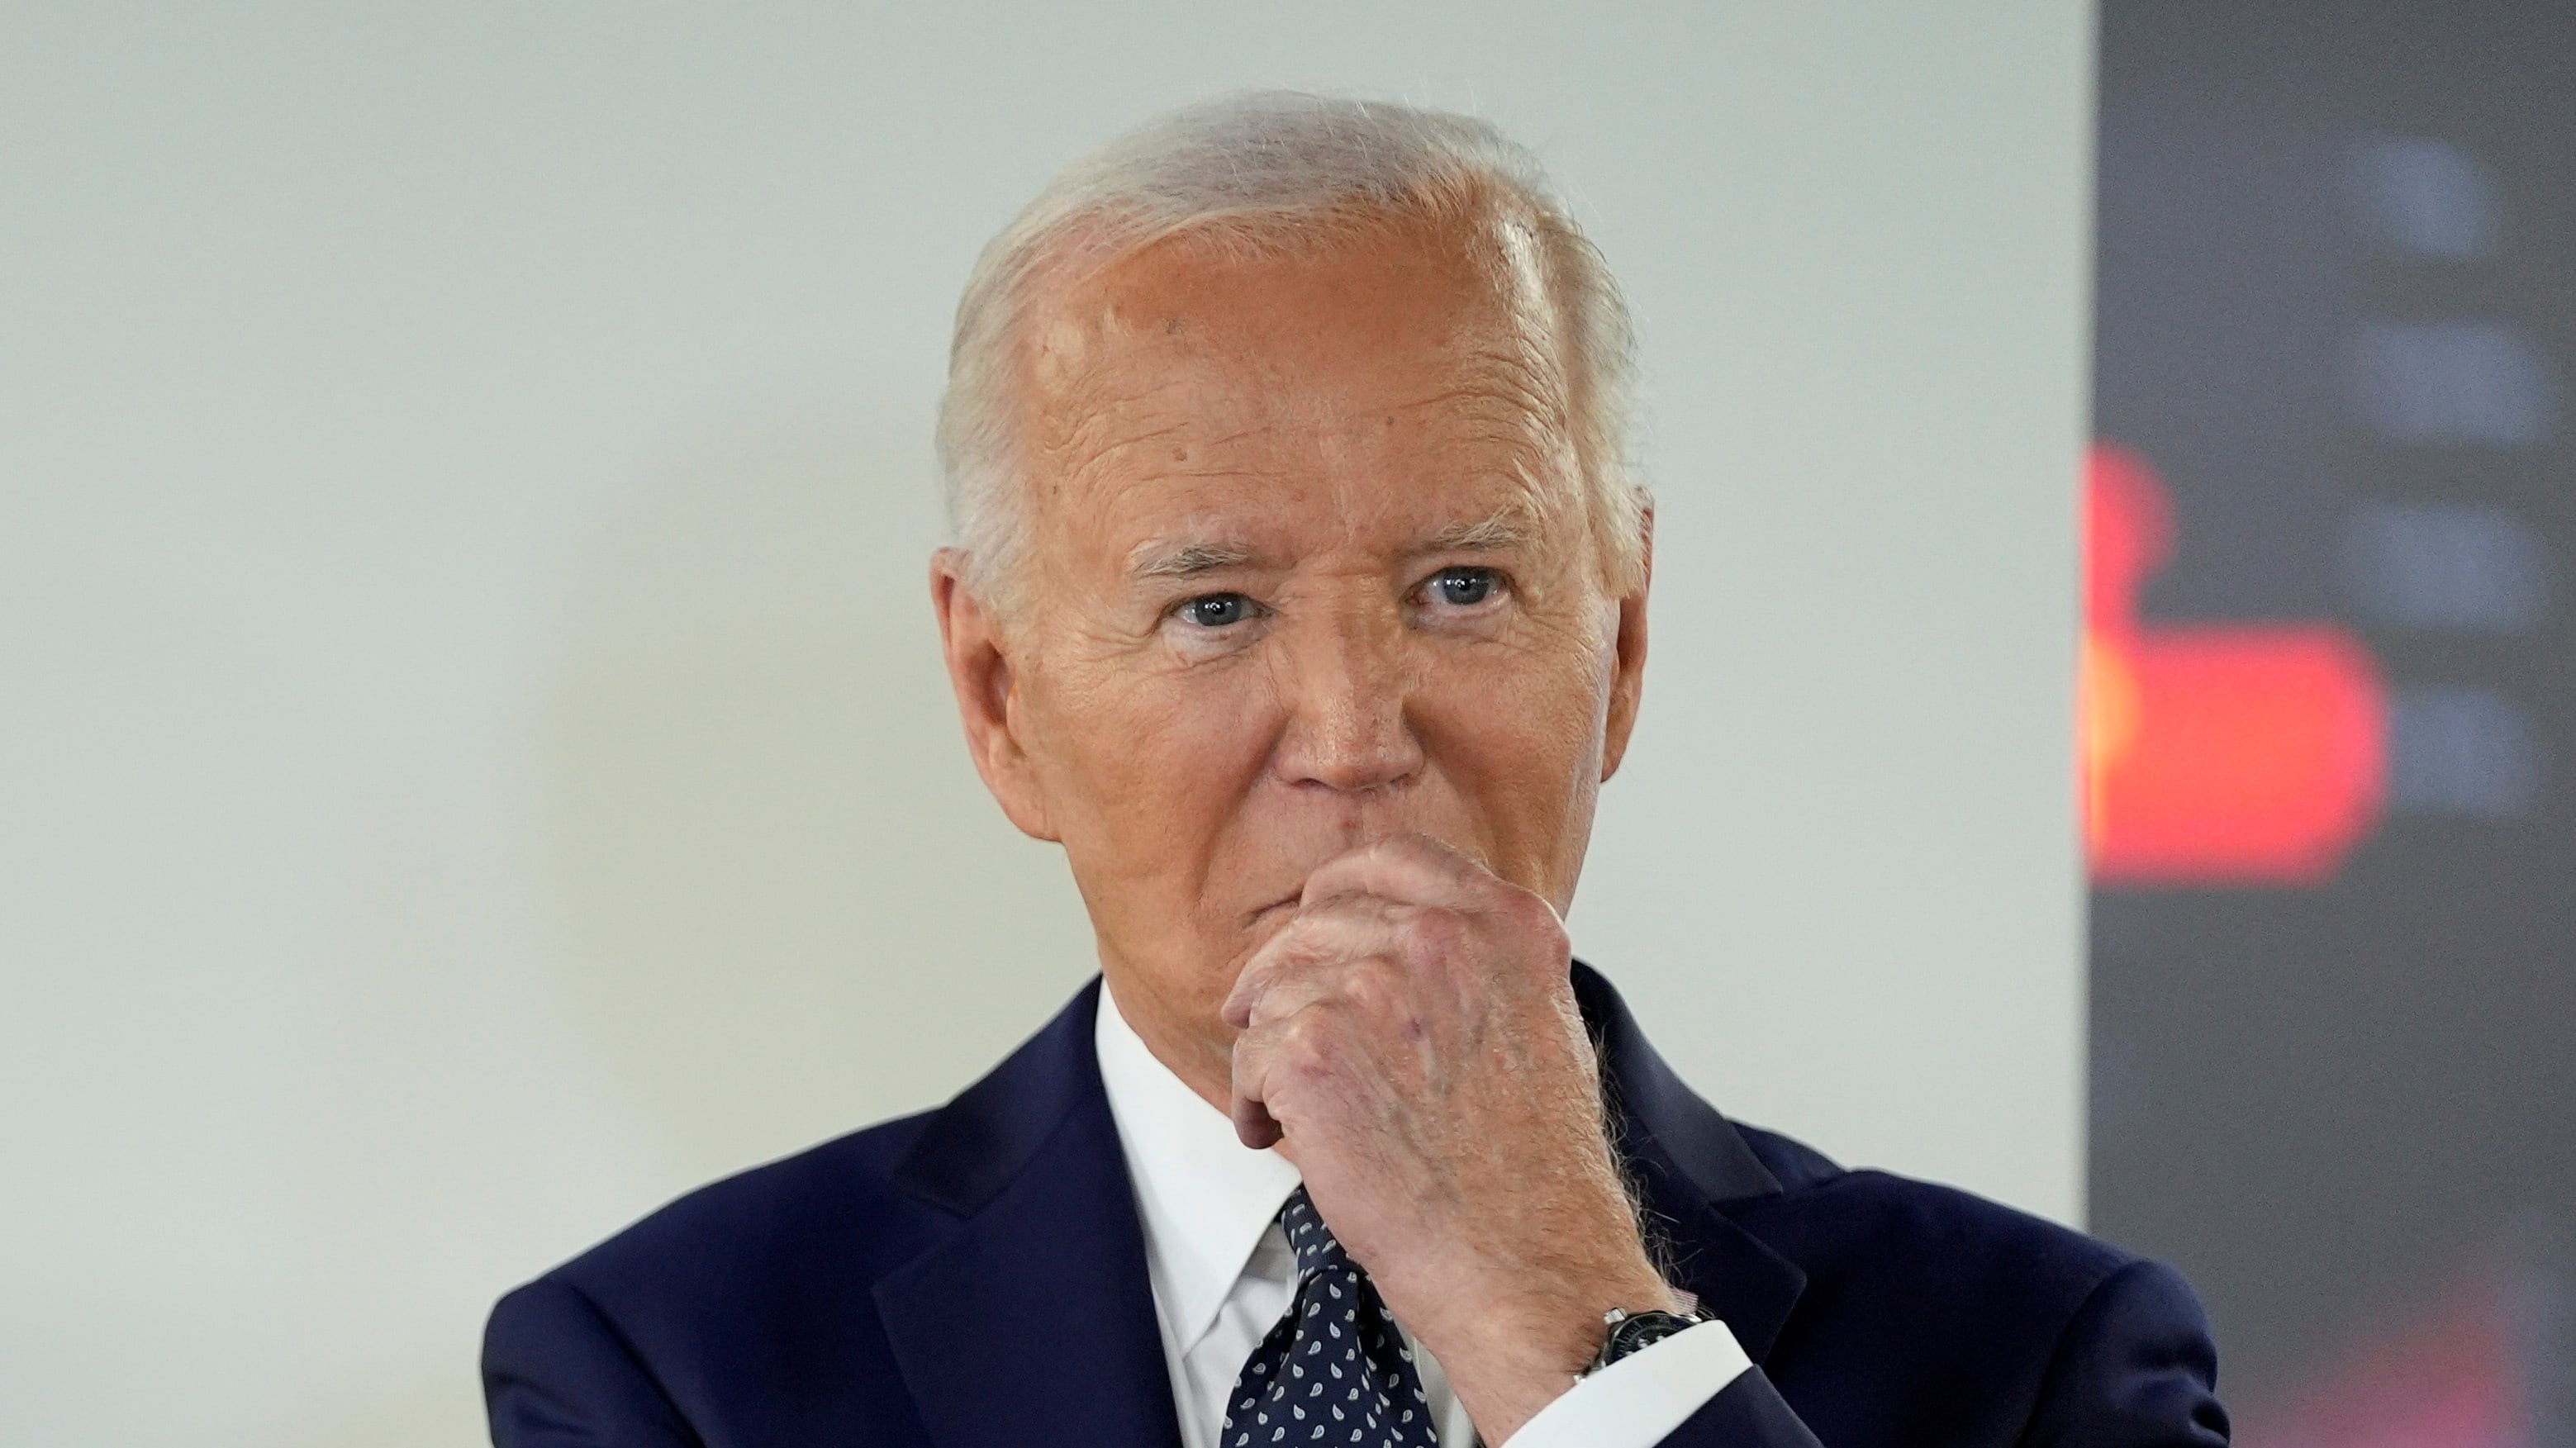 Joe Biden has insisted he will not pull out of the race for the presidency (AP Photo/Evan Vucci)